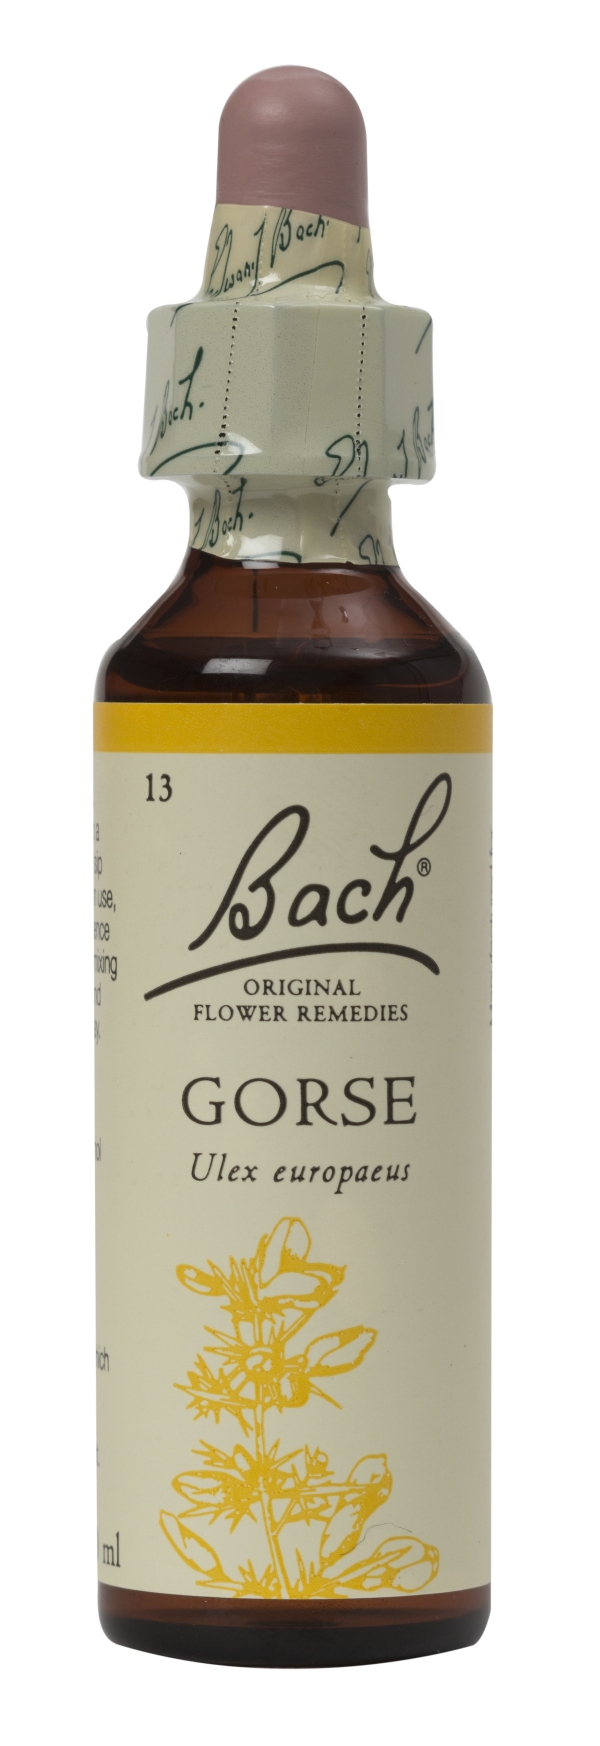 Nelson Bach Flower Remedies: Bach Gorse Flower Remedy (20ml) available online here